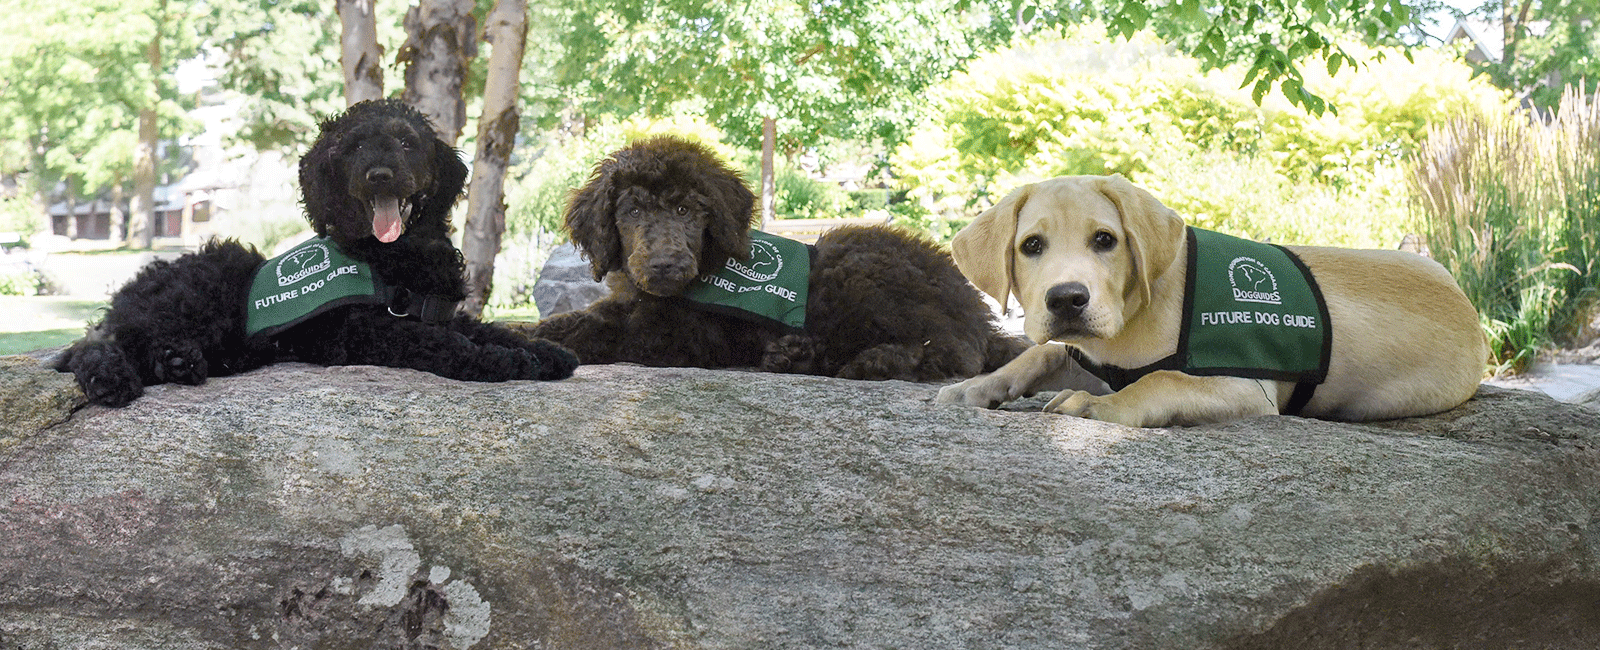 3 puppies on a rock